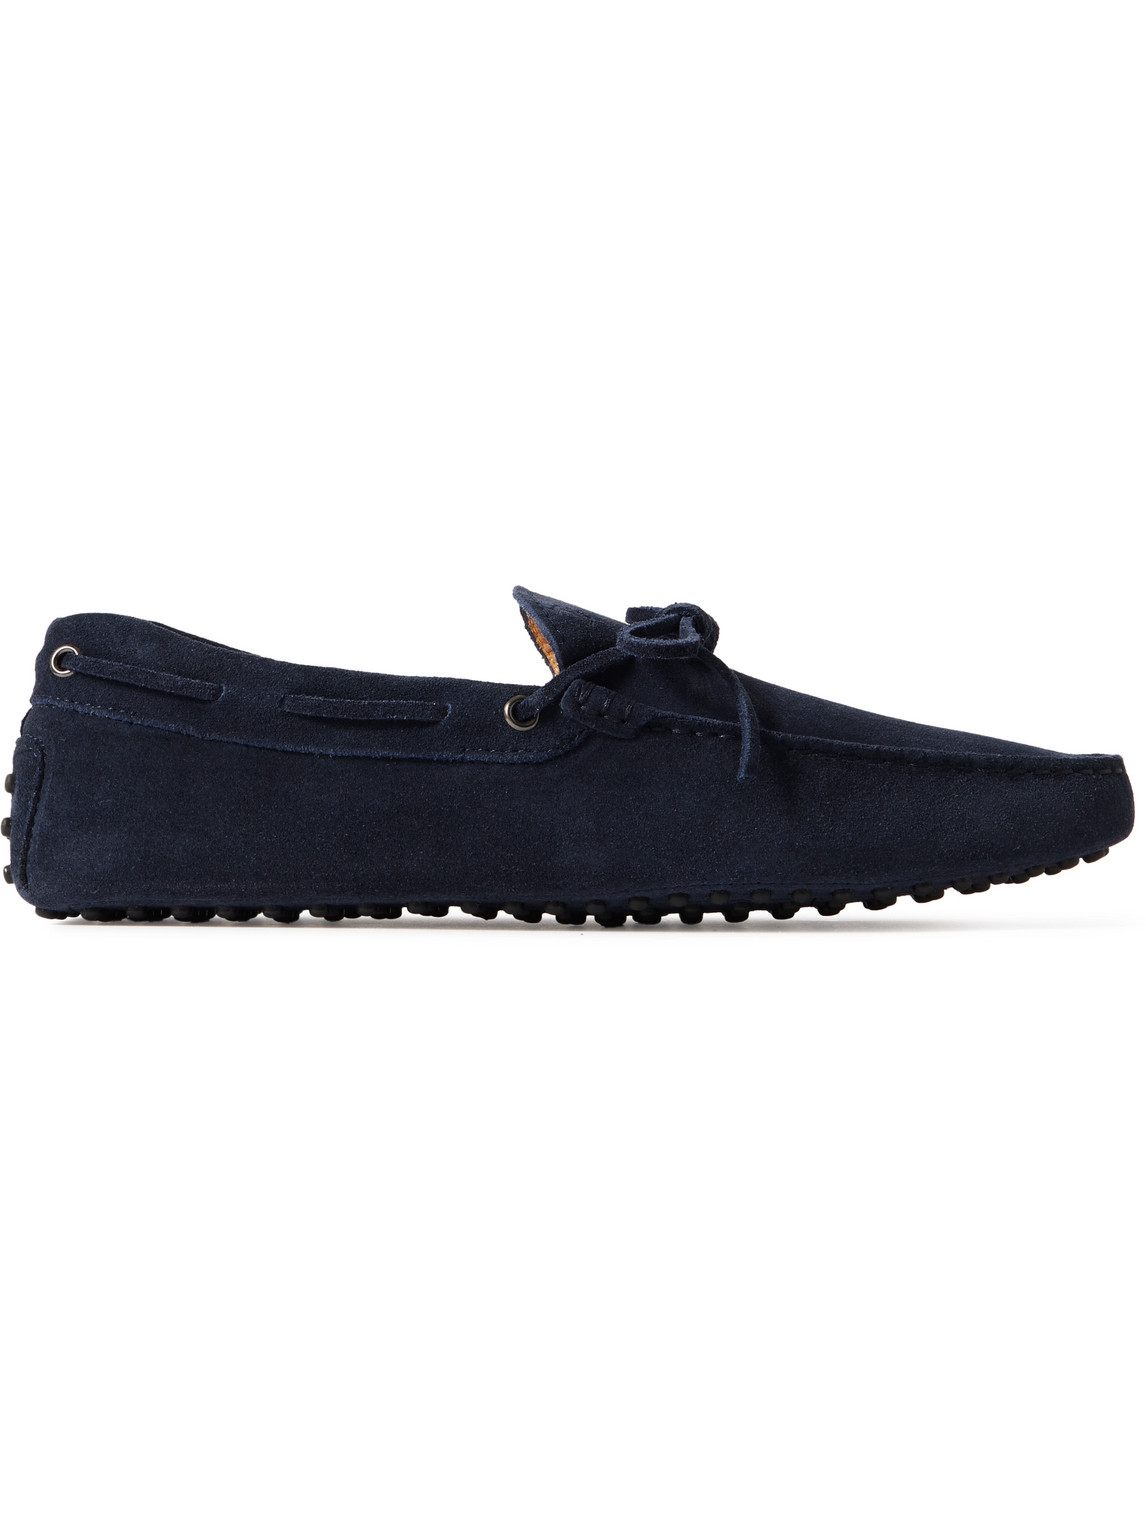 Tod's - Gommino Suede Driving Shoes - Men - Blue - UK 10 von Tod's